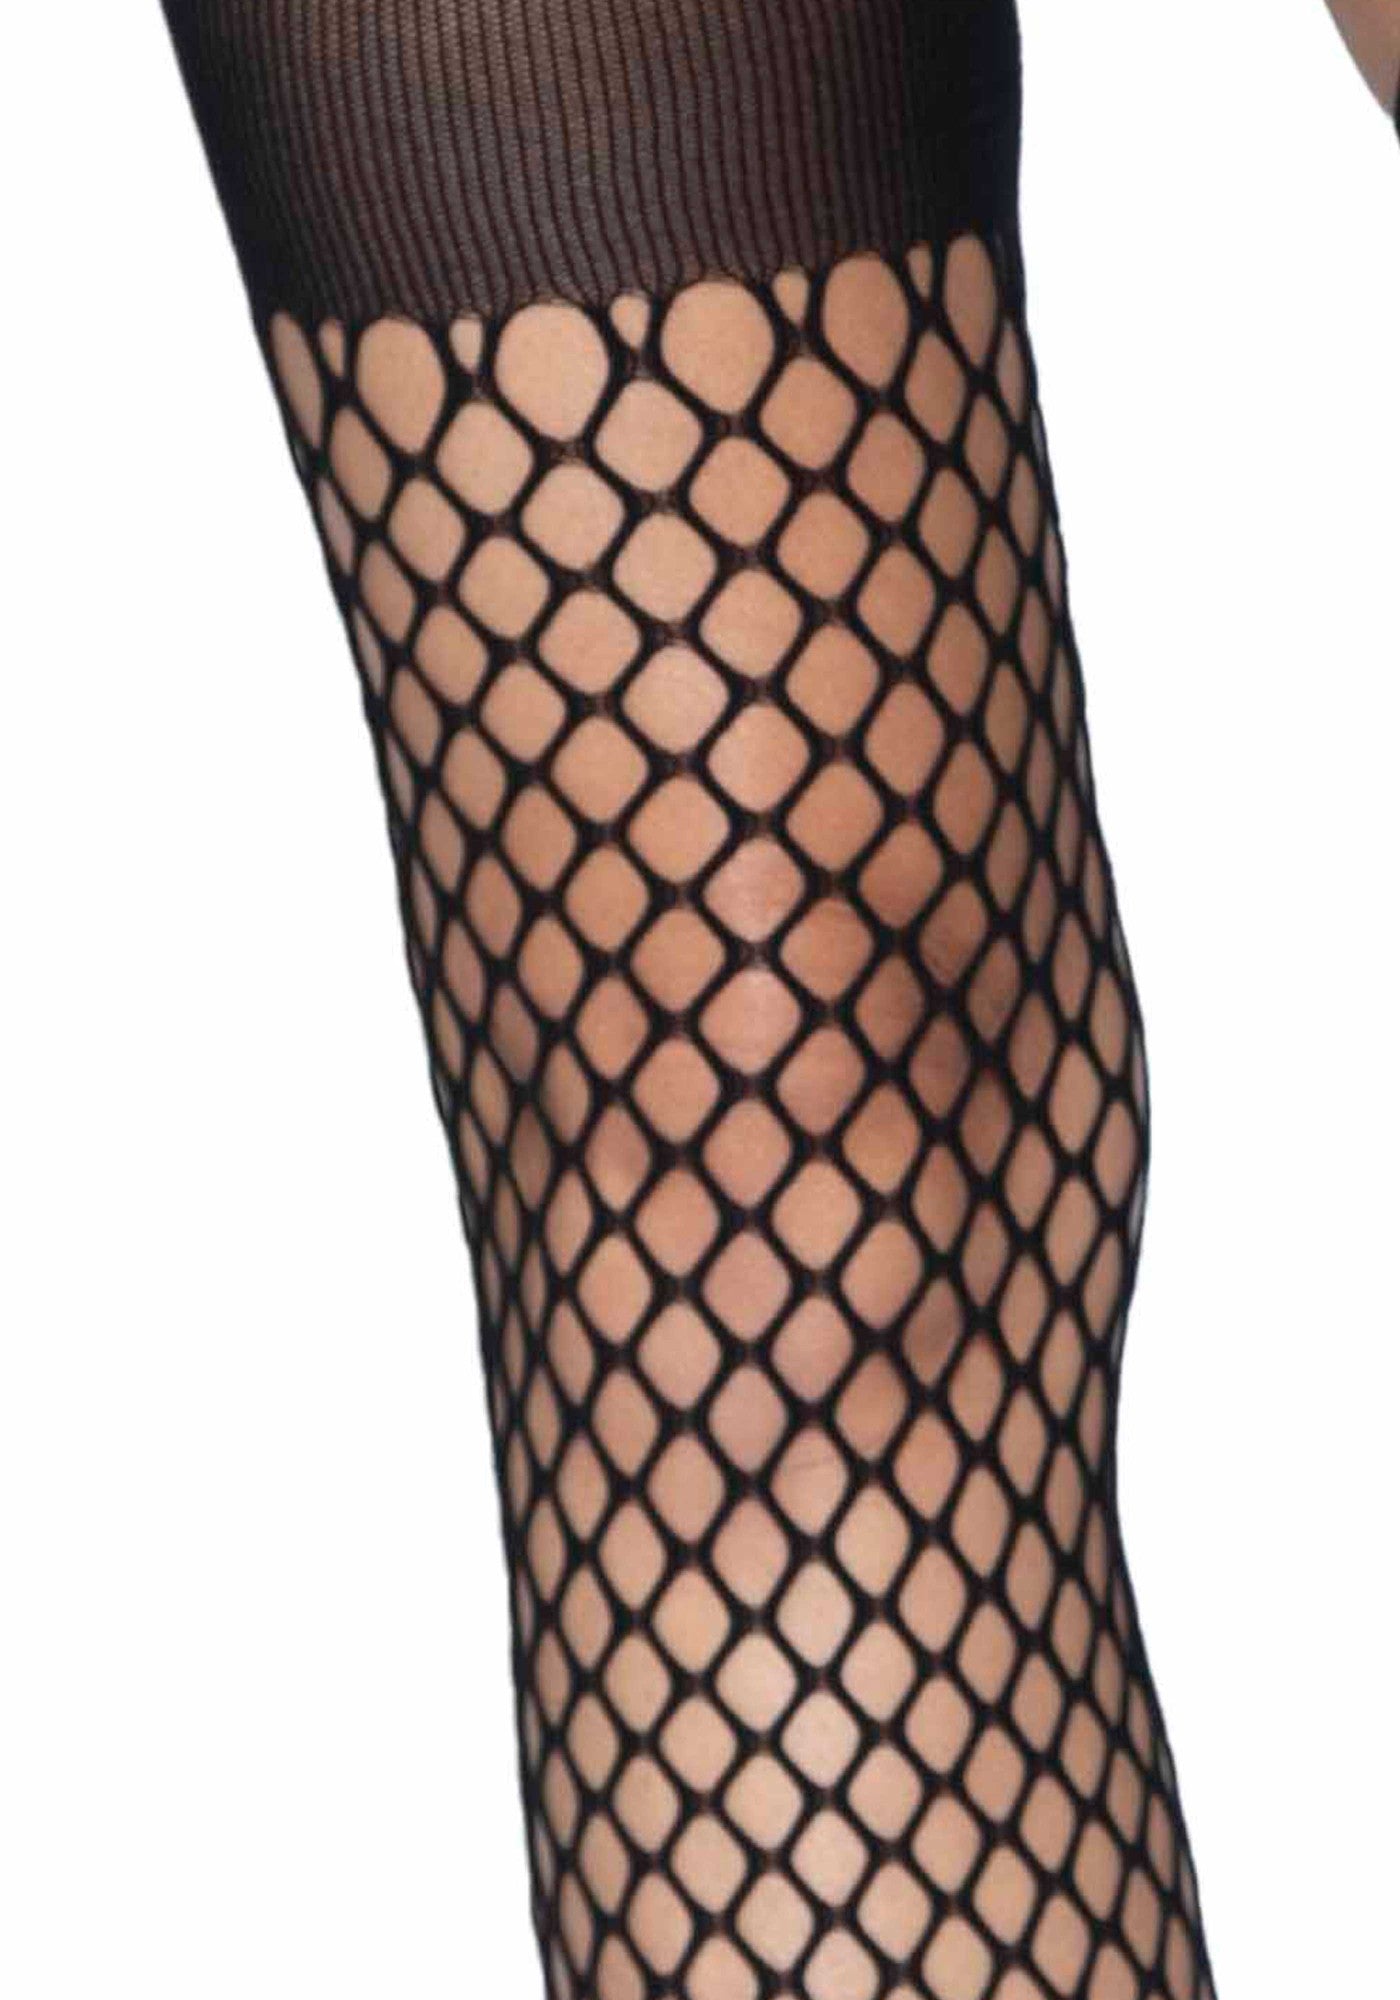 Leg Avenue 1953 Fishnet Suspender Tights - Black openwork fence fishnet style suspender tights with plain opaque top and toe.